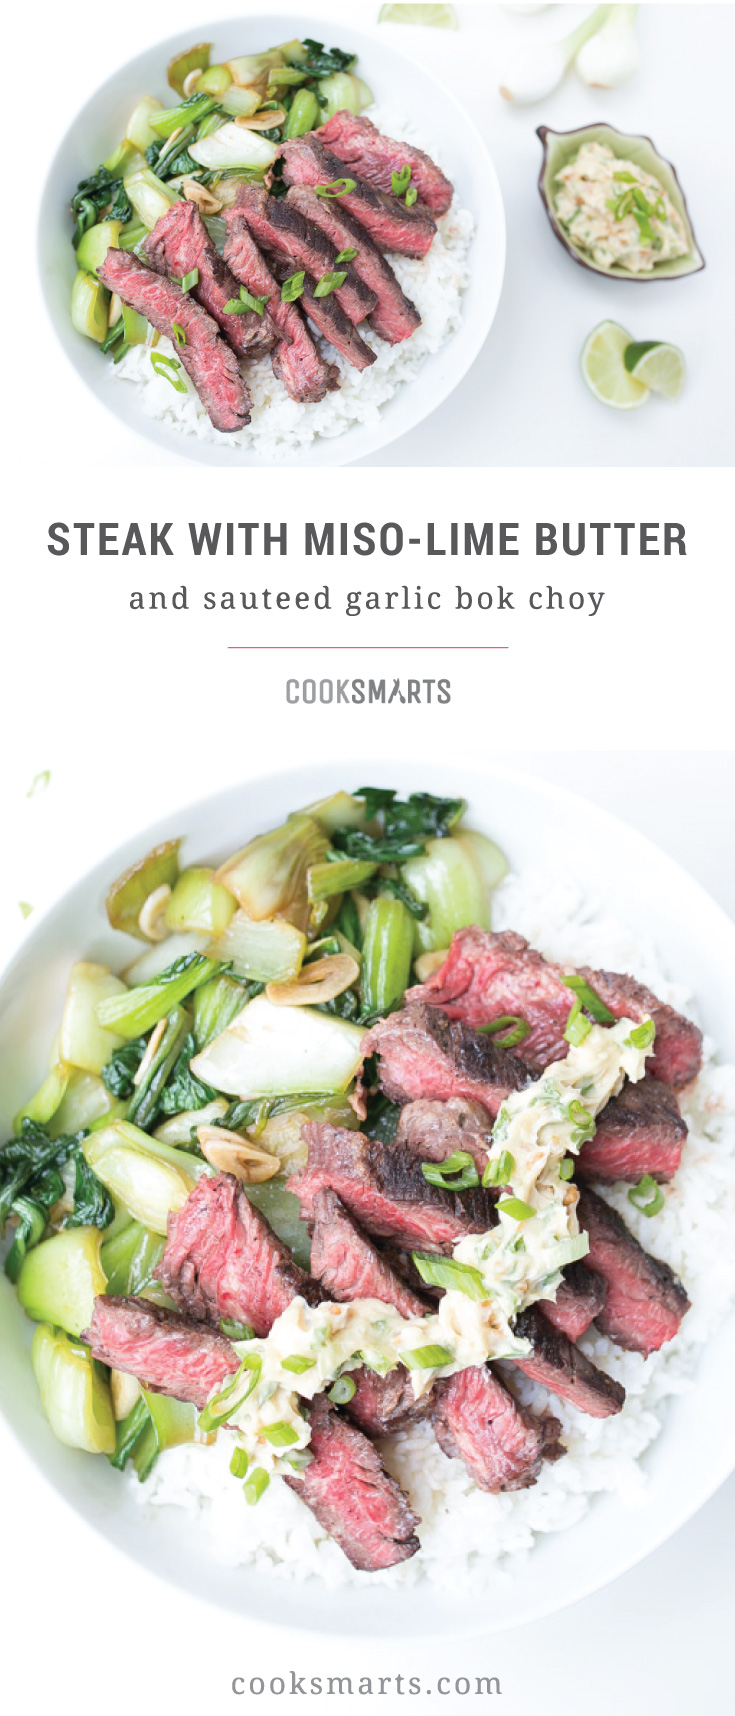 Cook Smarts Recipe: Steak with Miso-Lime Butter & Sauteed Garlic Bok Choy